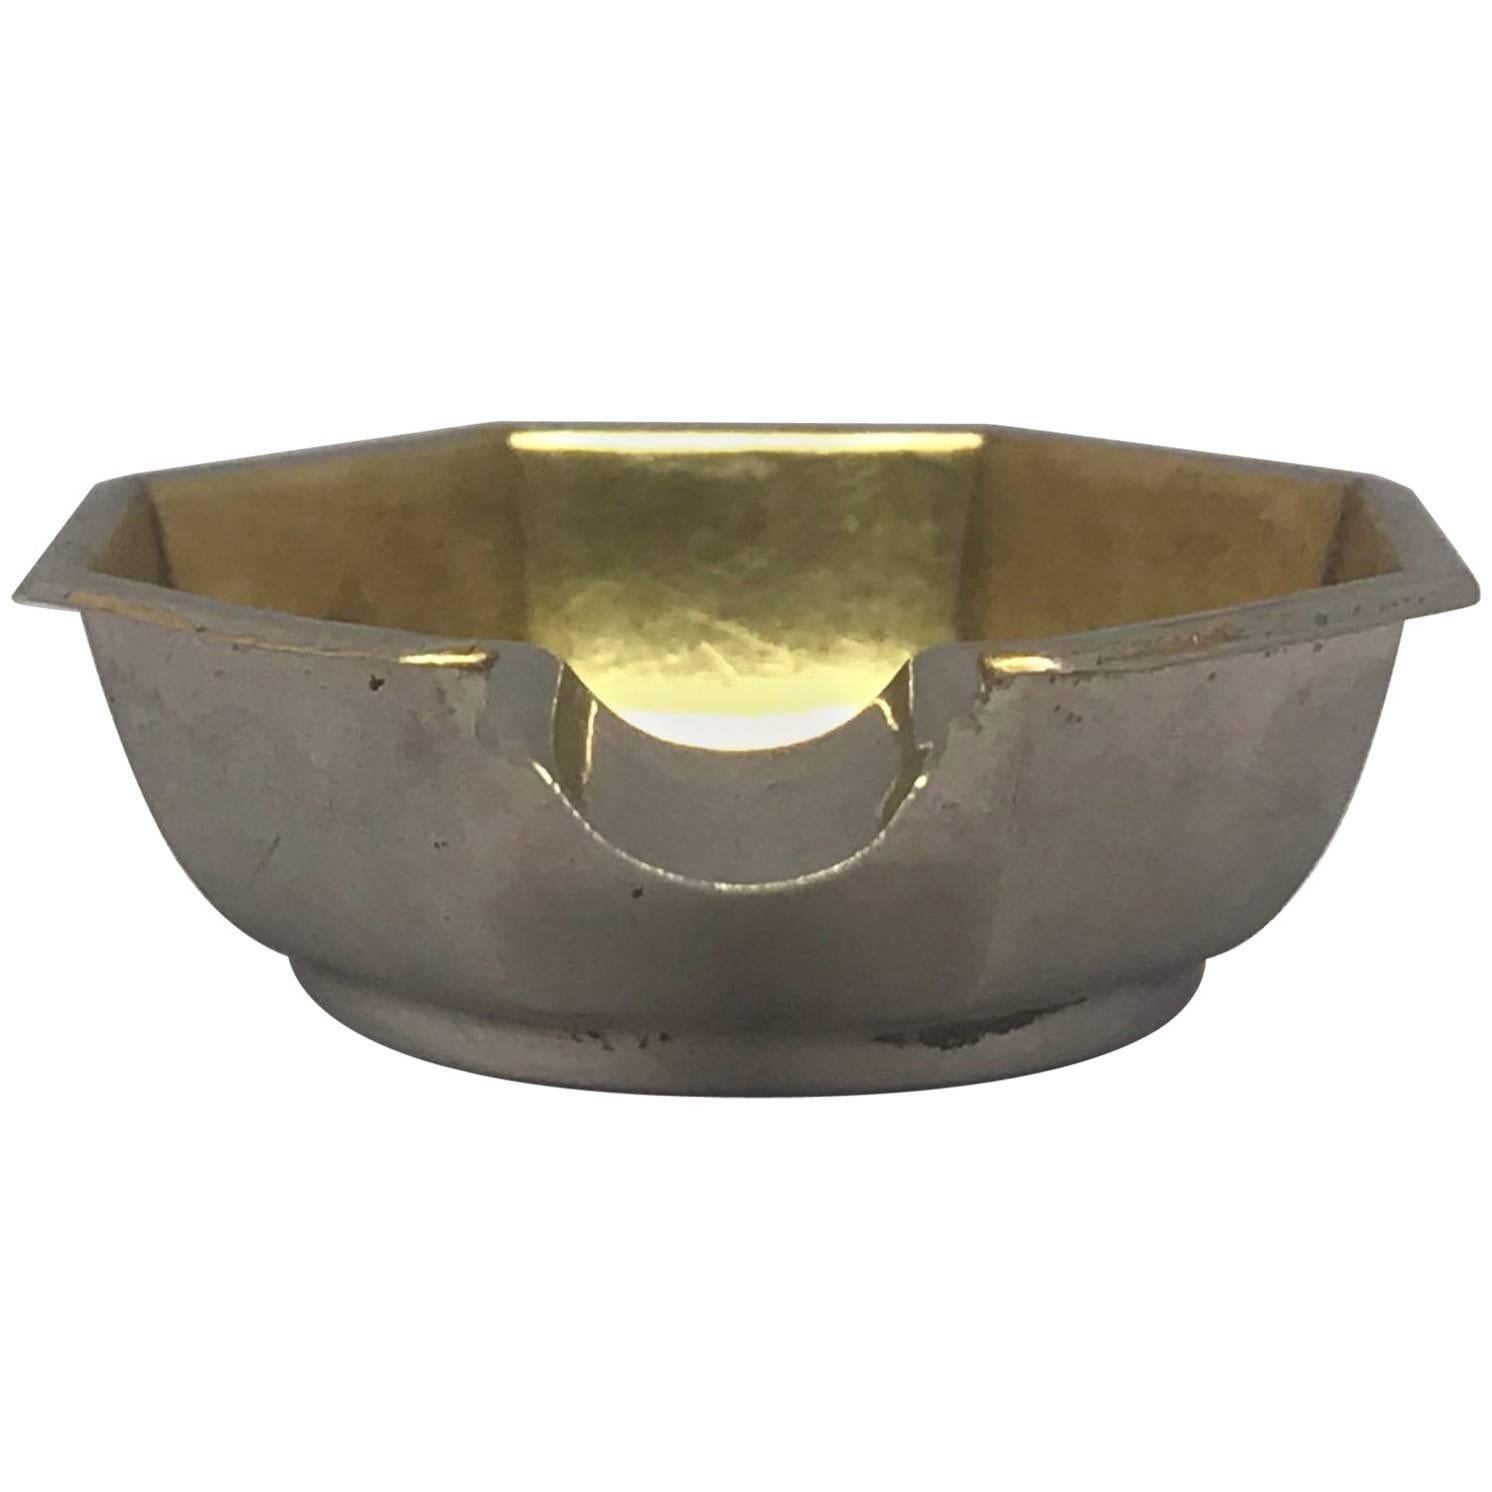 Silver and vermei German Deco ashtray. Small eight sided silver and gilt washed ashtray for individual use, Germany, late 1930s.
Dimensions: 2.75